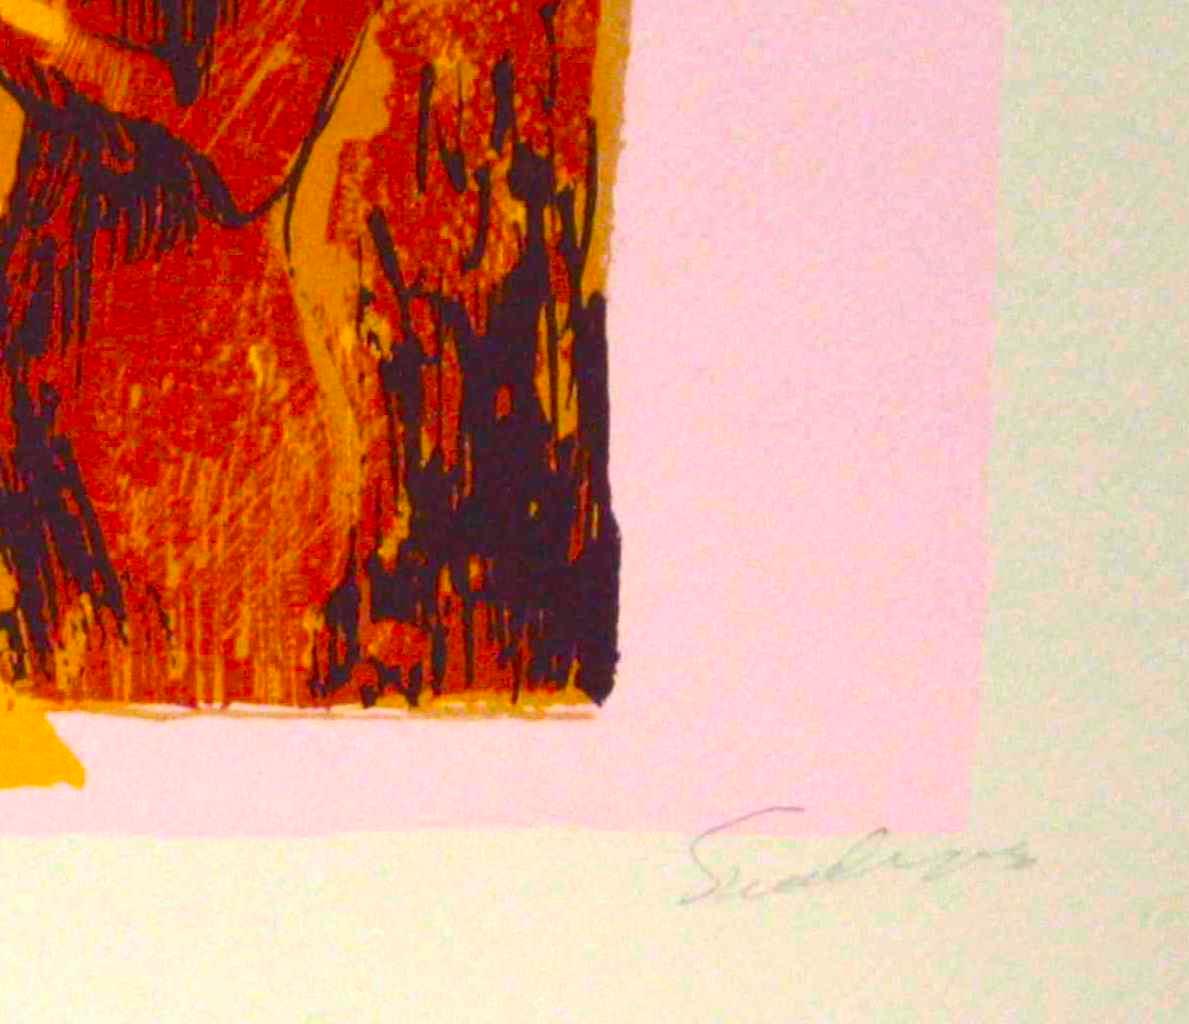 Woman in Pink - Original Lithograph by Nicola Simbari - 1976 For Sale 3